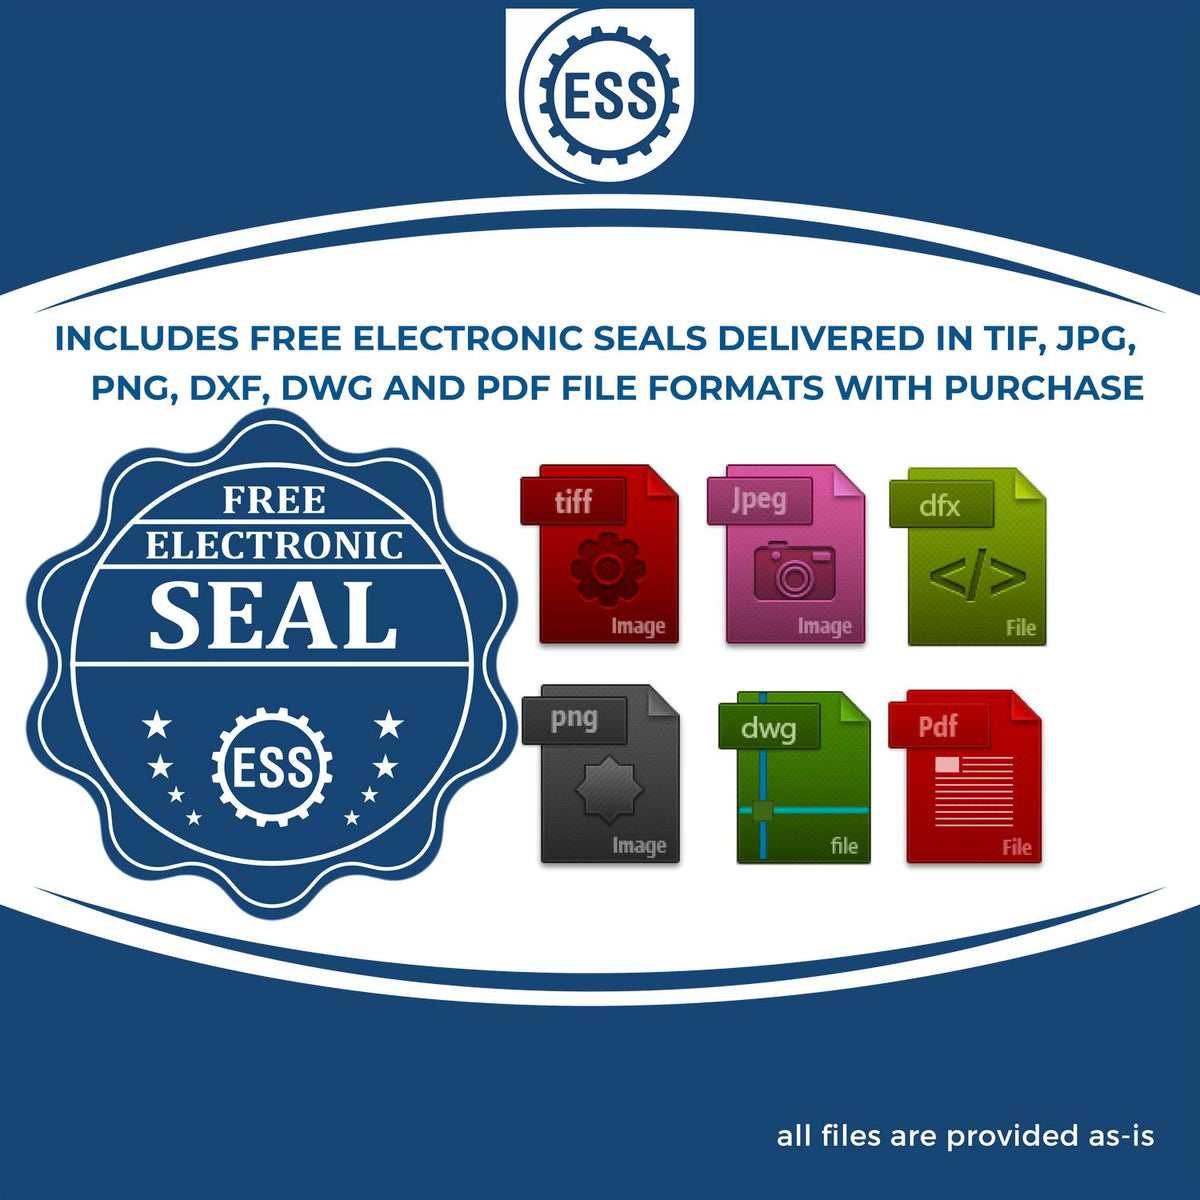 An infographic for the free electronic seal for the Indiana Engineer Desk Seal illustrating the different file type icons such as DXF, DWG, TIF, JPG and PNG.